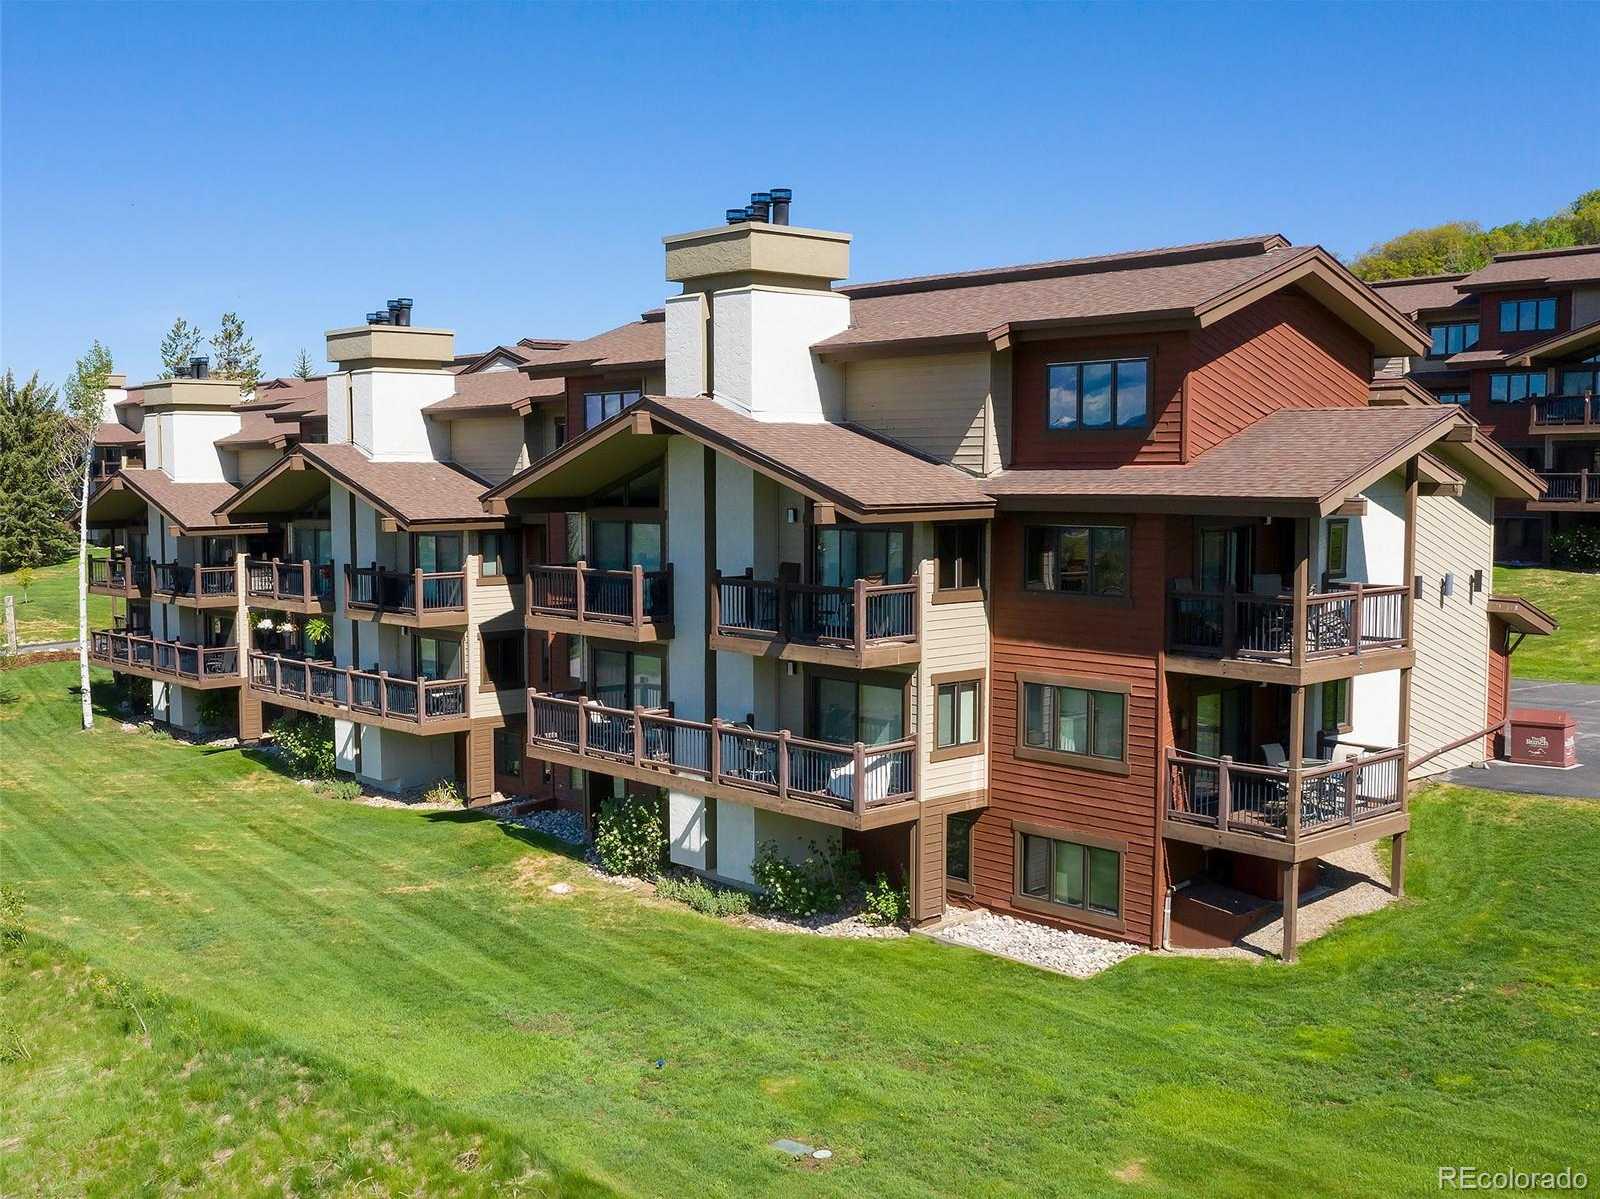 View Steamboat Springs, CO 80487 condo